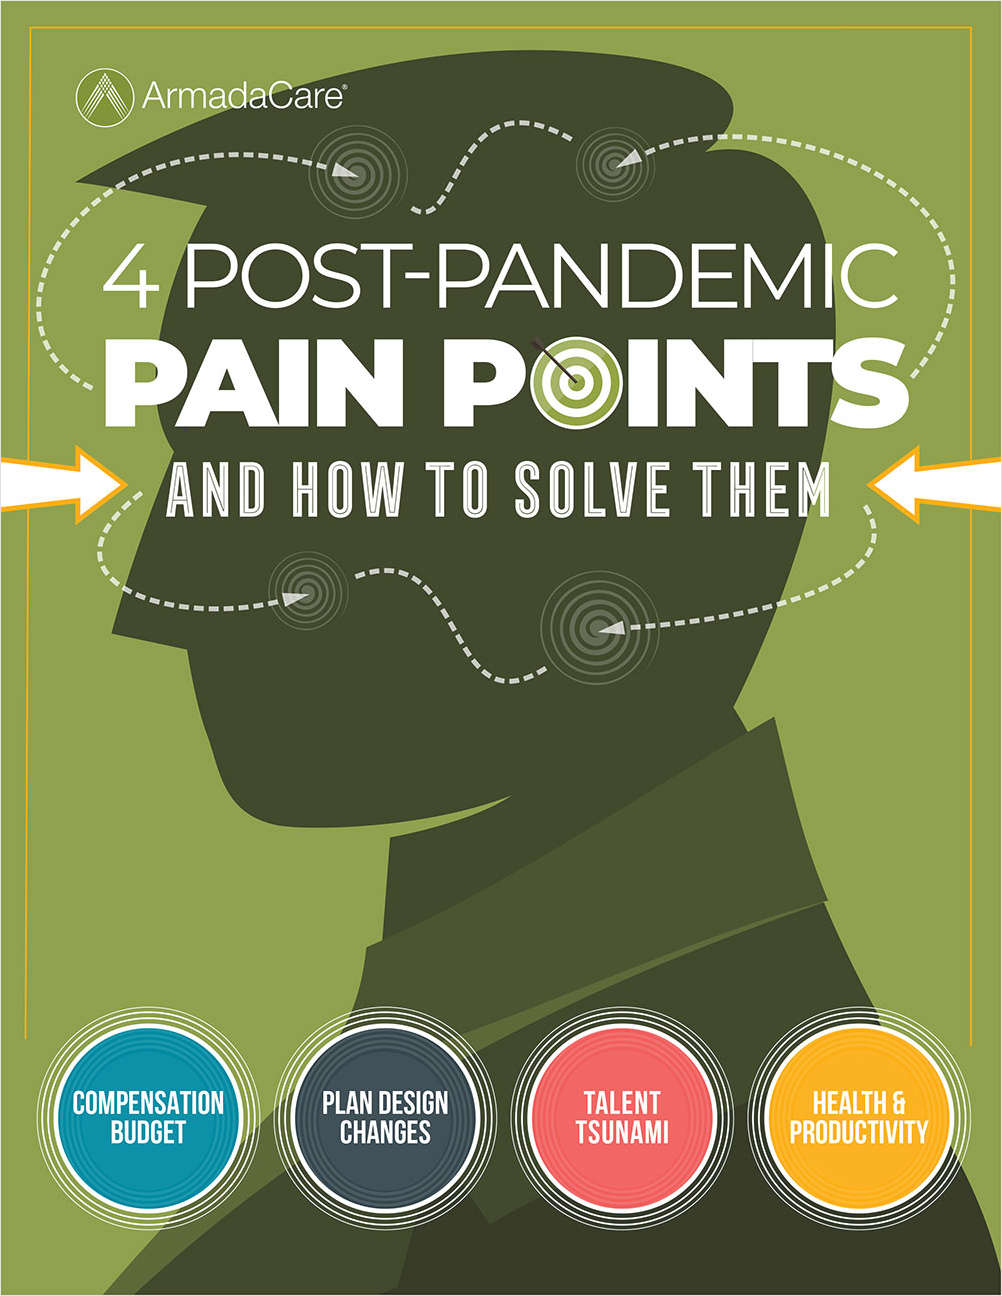 4 Post-Pandemic Pain Points and How to Solve Them